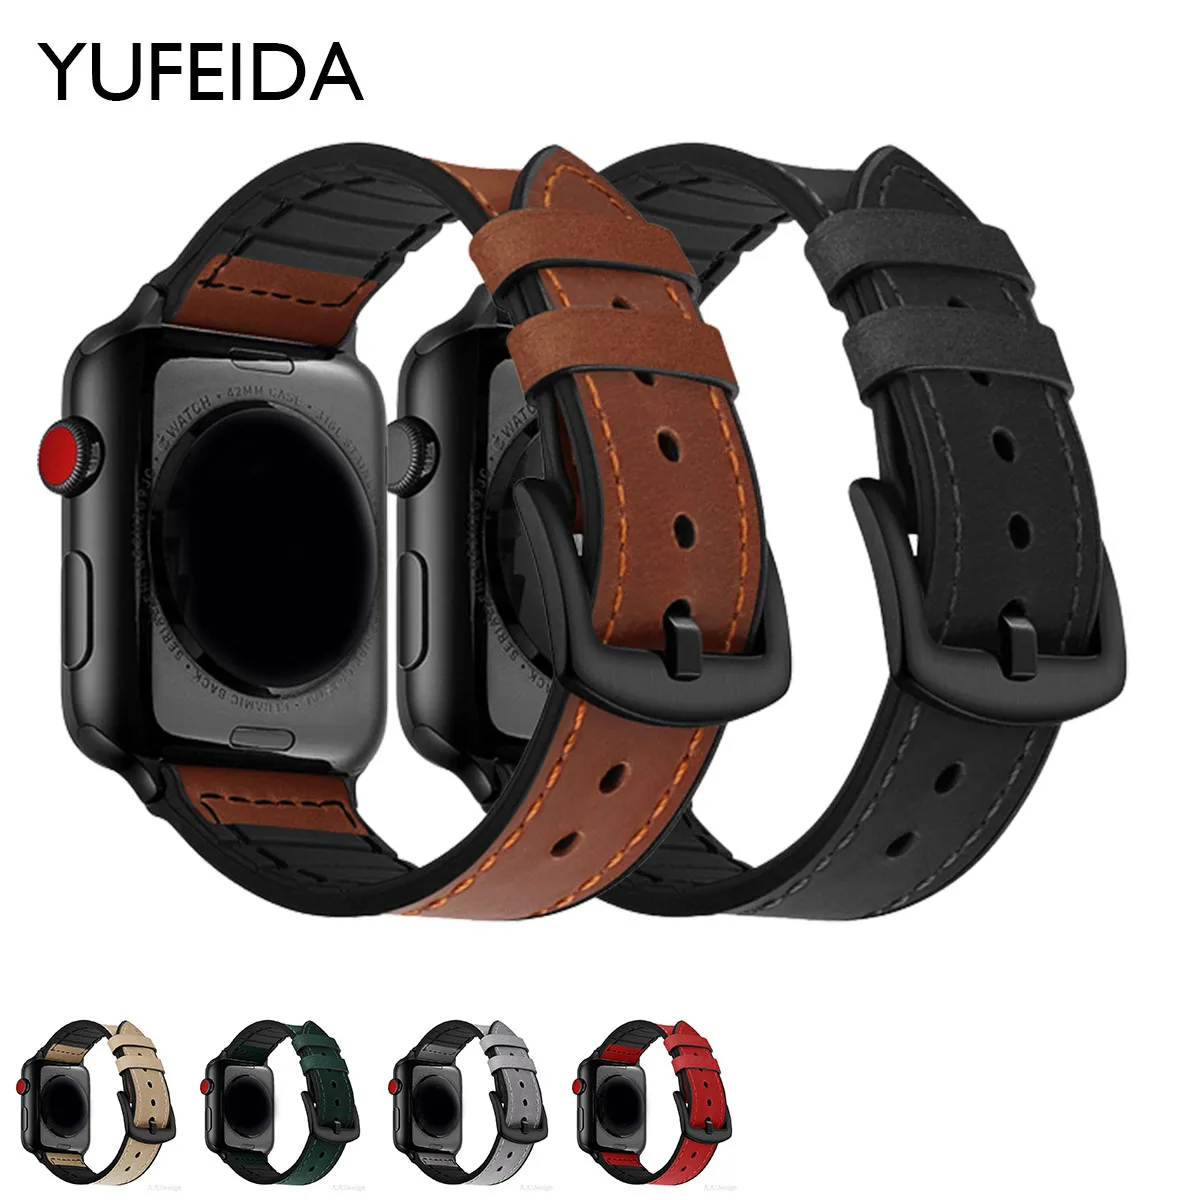 

YUFEIDA Silicone Leather Strap for Apple Watch Band 38/40/41MM 42/44/45MM Watch Bracelet for Iwatch Series 7654321SE Sport Strap